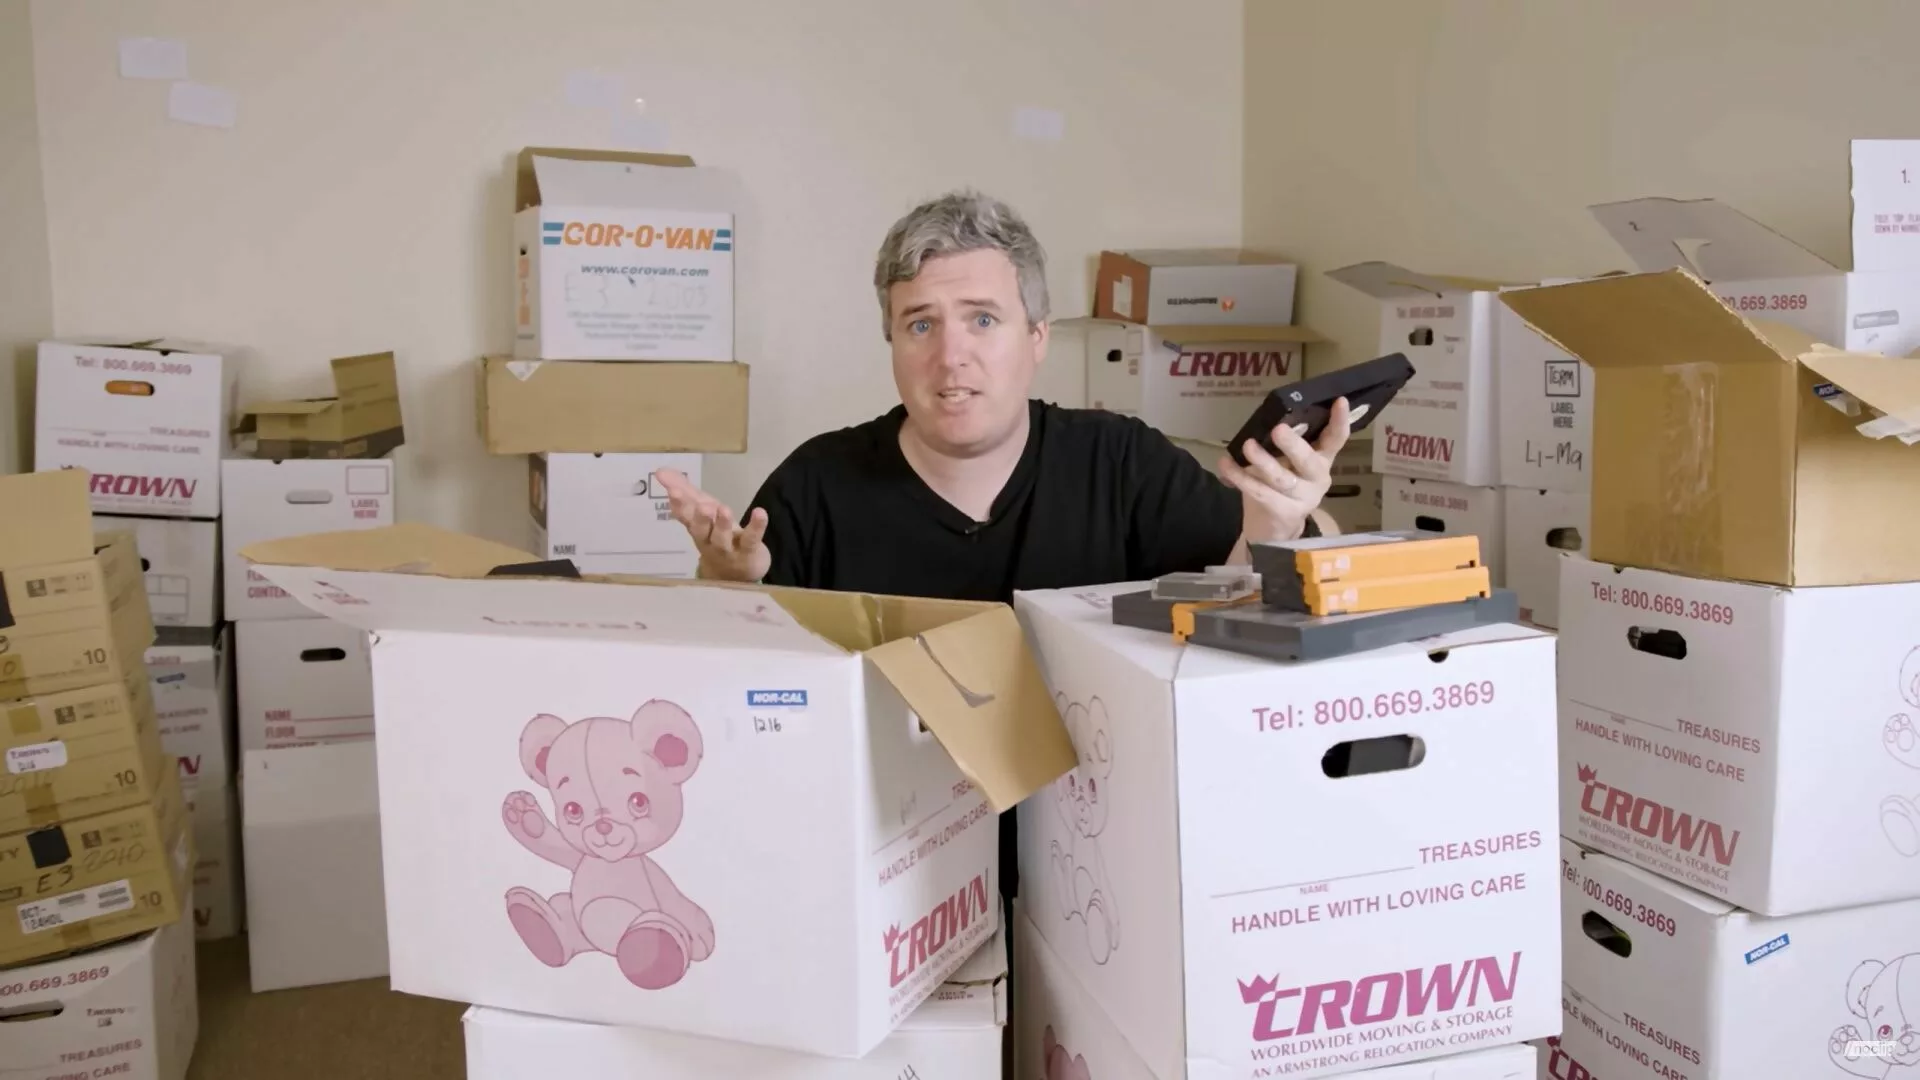 A Noclip video still showing Danny O'Dwyer with boxes of videotapes